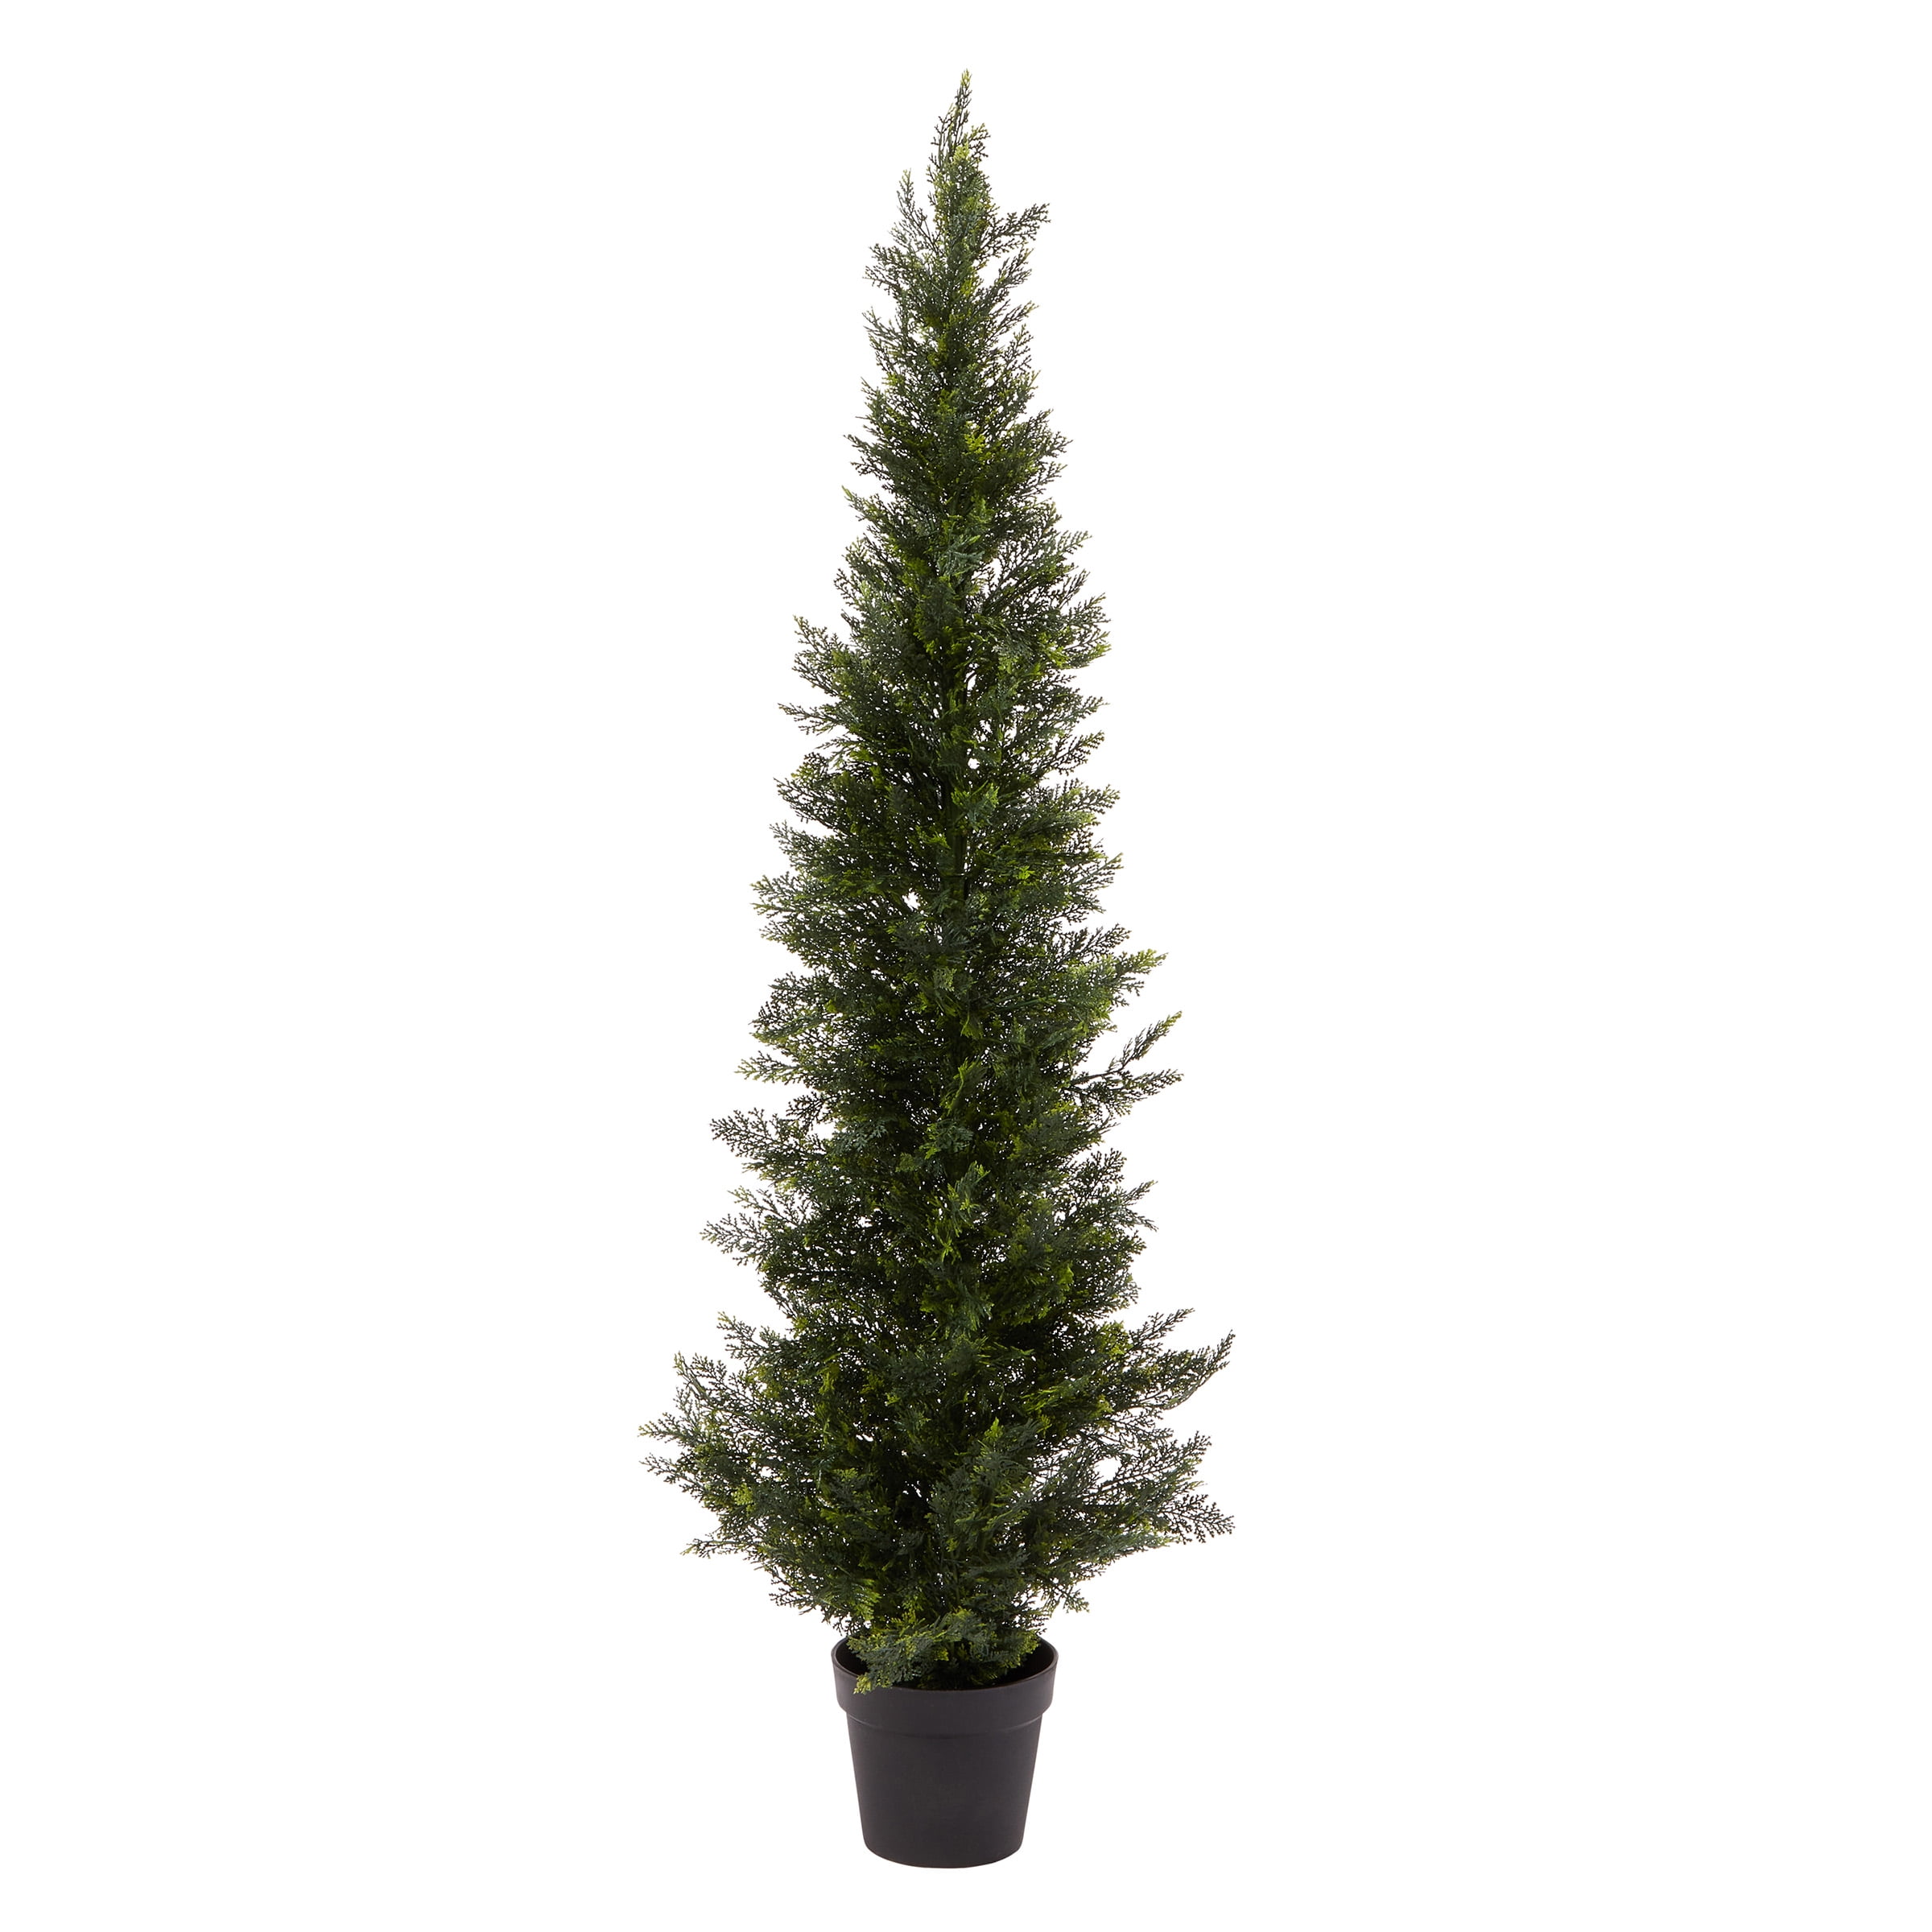 Set of 2 Lighted Pre-Potted 4 Foot Artificial Cedar Topiary Outdoor Indoor Trees Battery Operated with Timers Ten Waterloo Set of 2